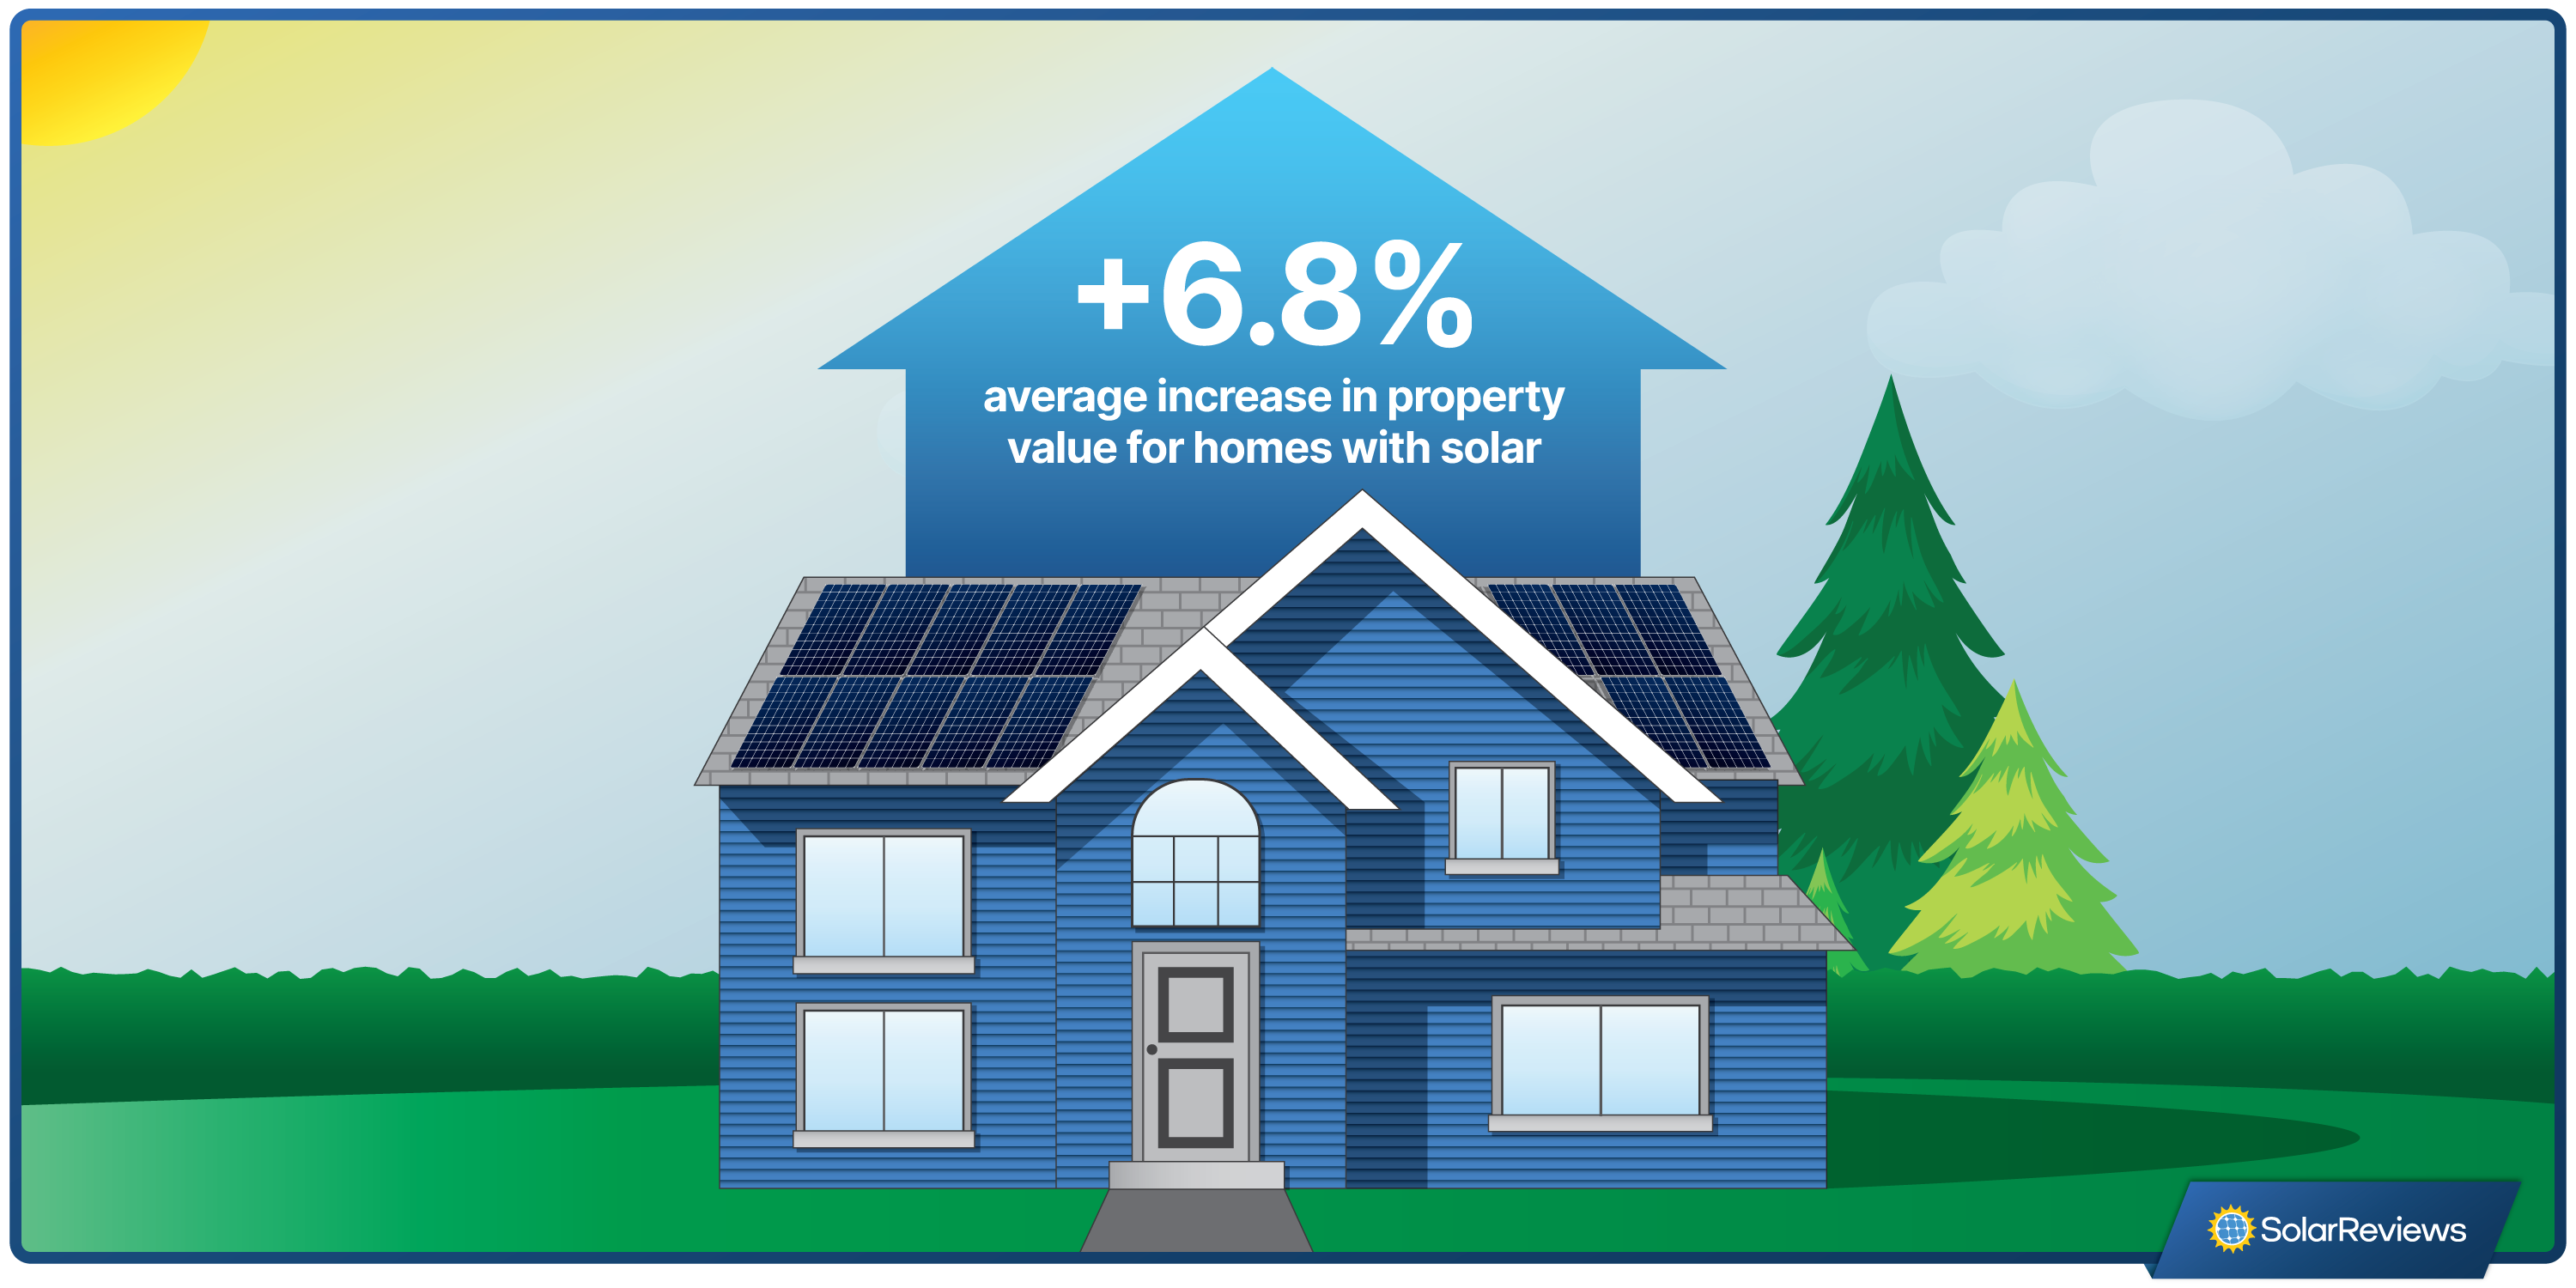 Graphic of a home with solar panels and an arrow that says "+6.8% average increase in property value for homes with solar"